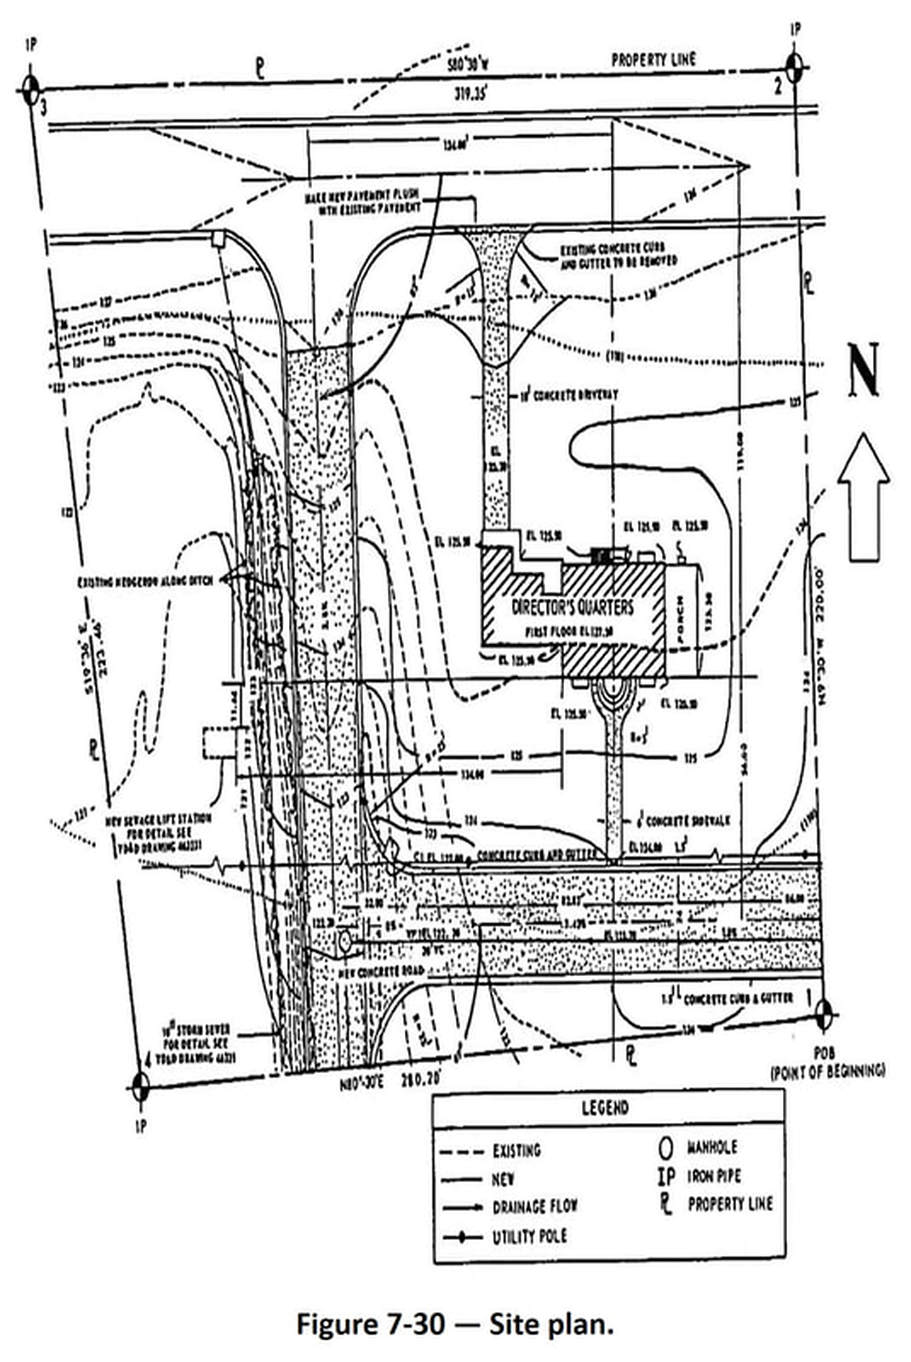 Architectural Construction Drawings Computer Aided Drafting Design